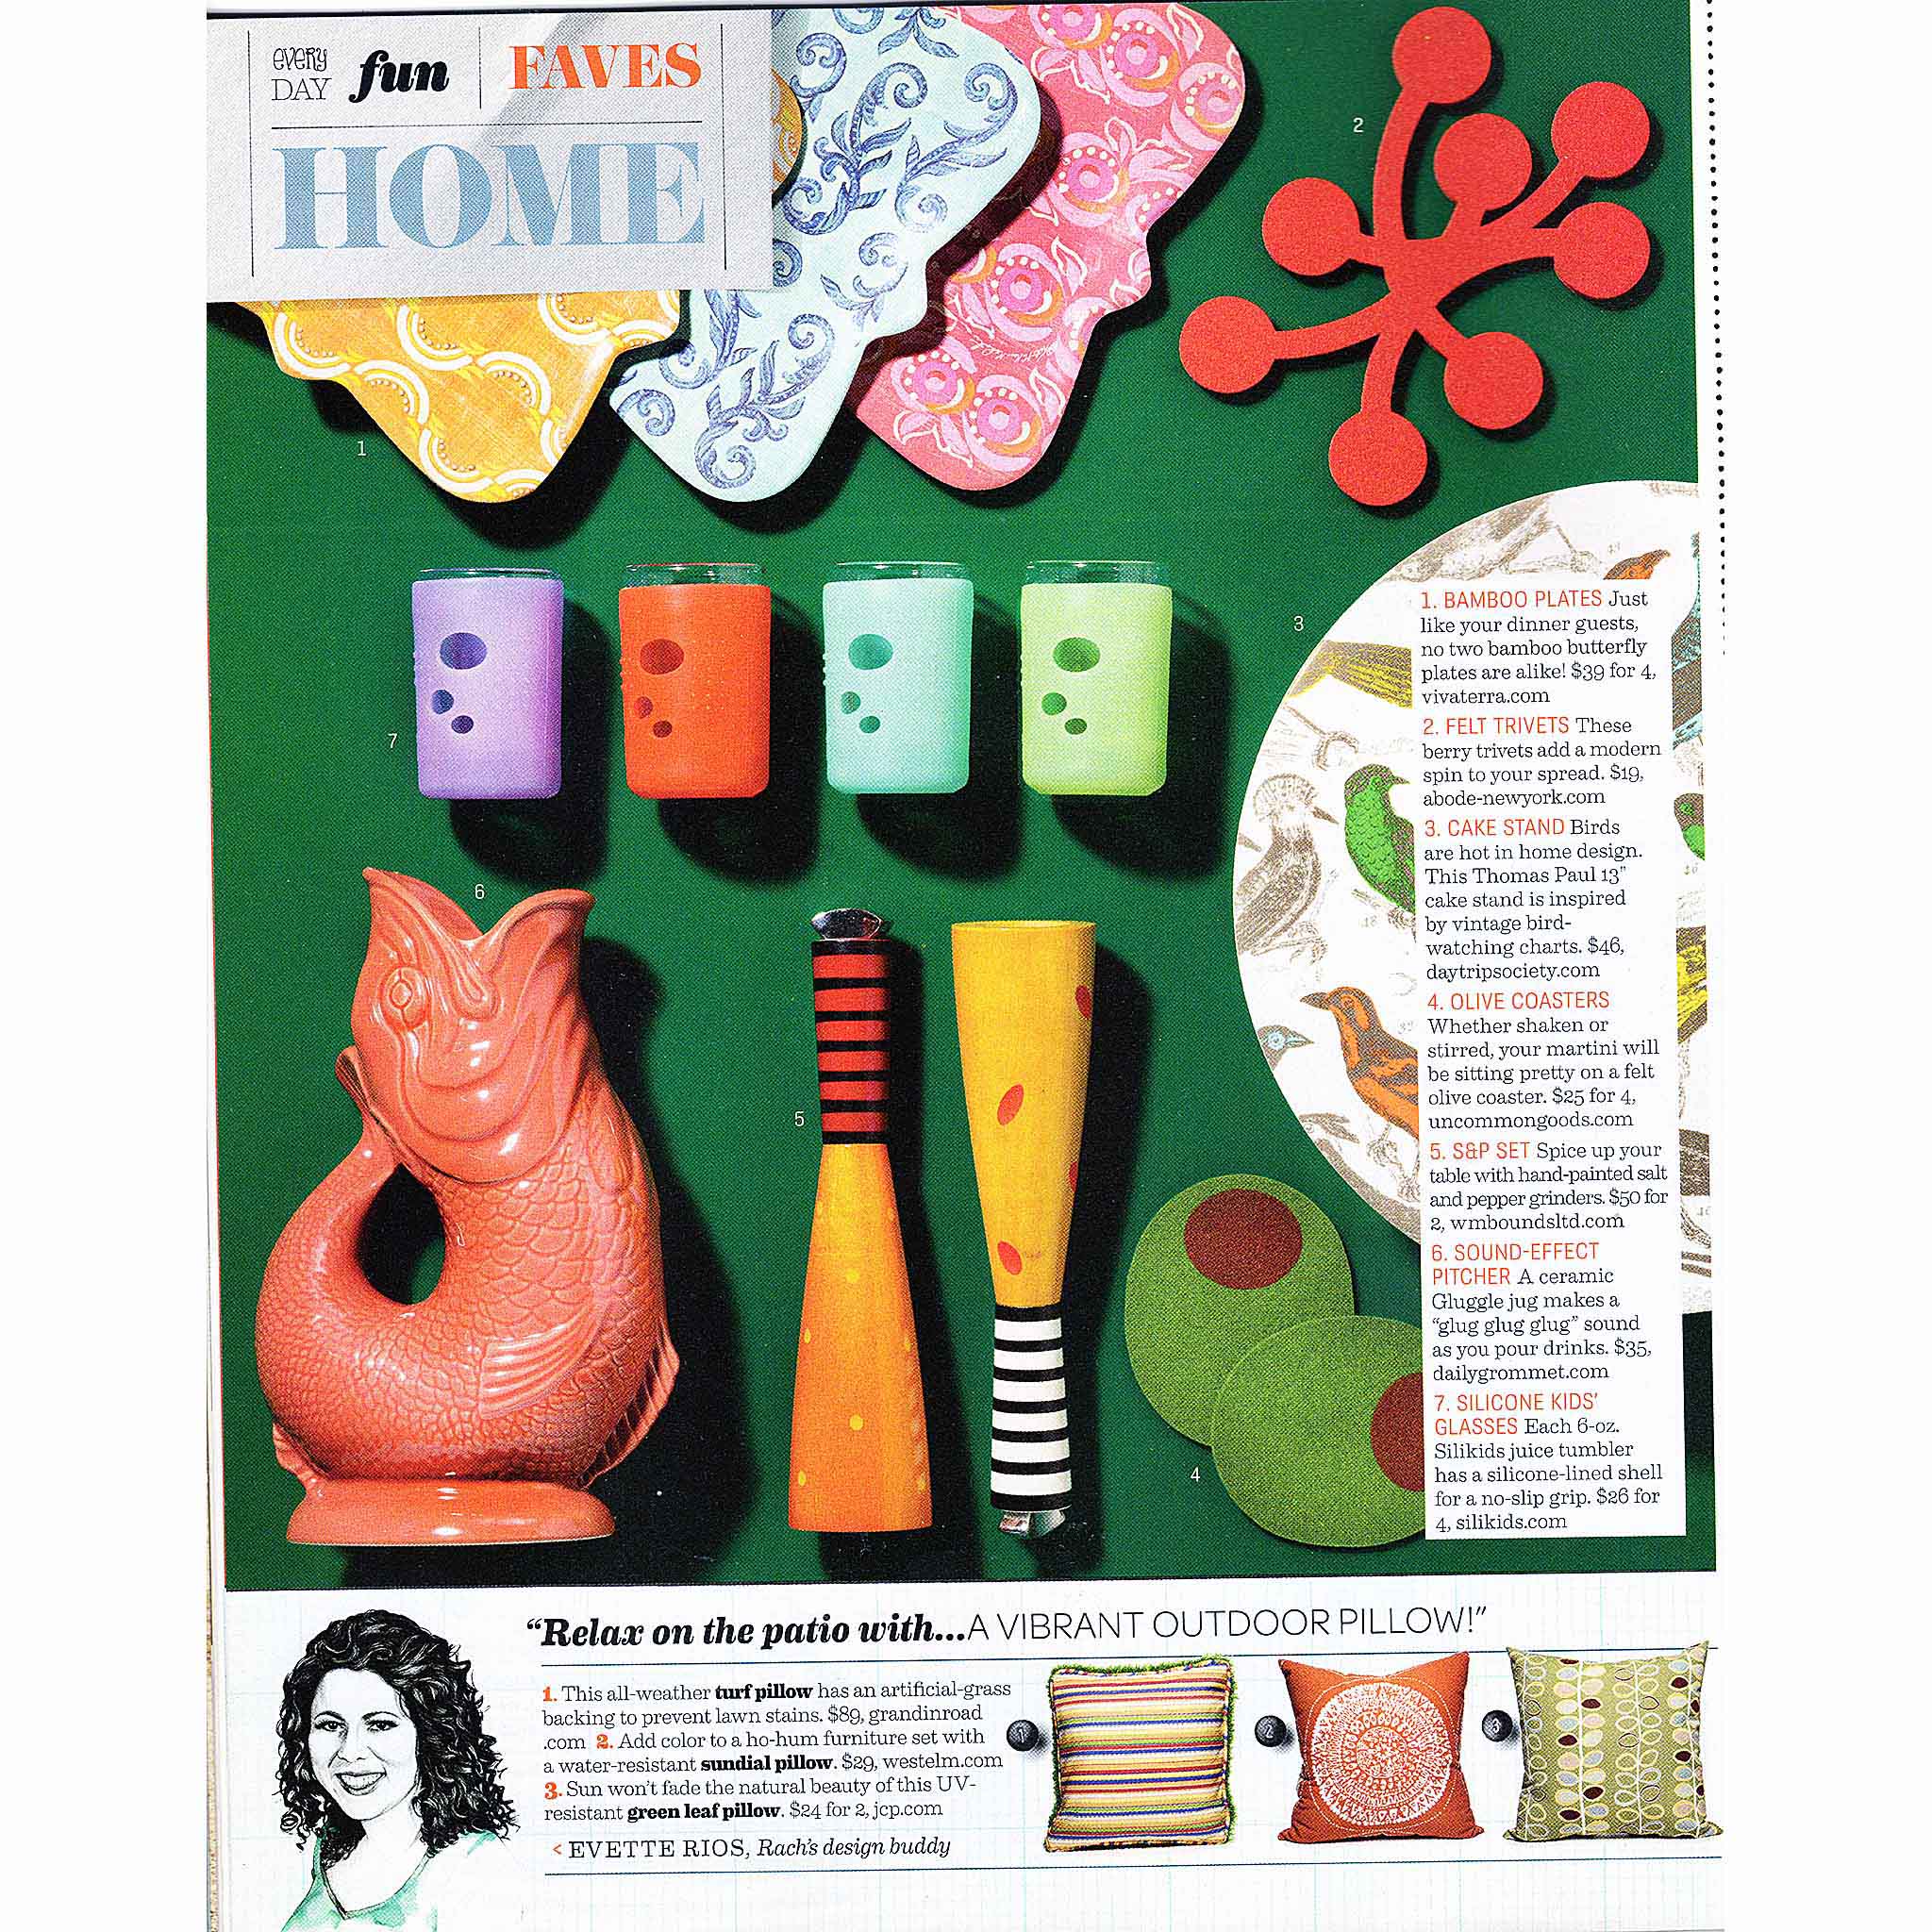 Every Day with Rachael Ray, "Every Day Fun - Faves / Home," Marja Small Trivet in Red, May 2011, page 54. 